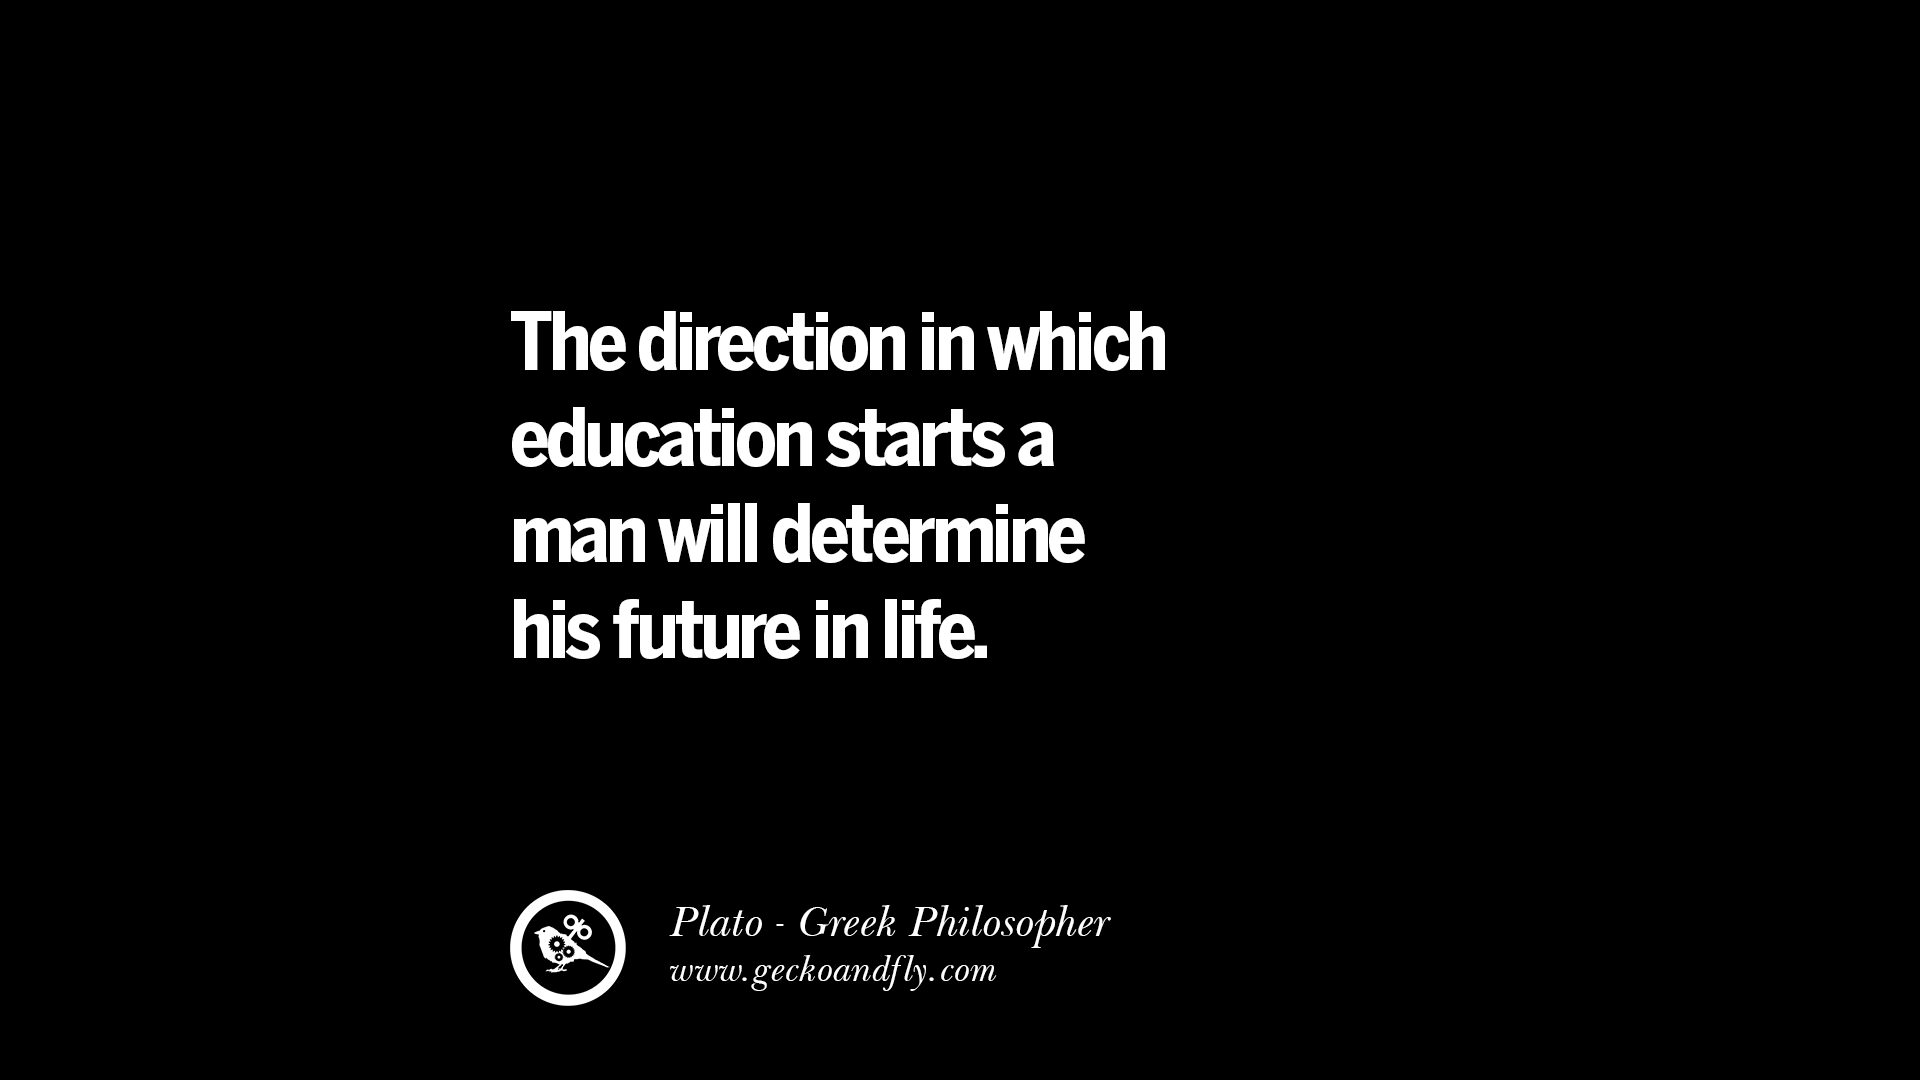 The direction in which education starts a man will determine his future in life – Plato